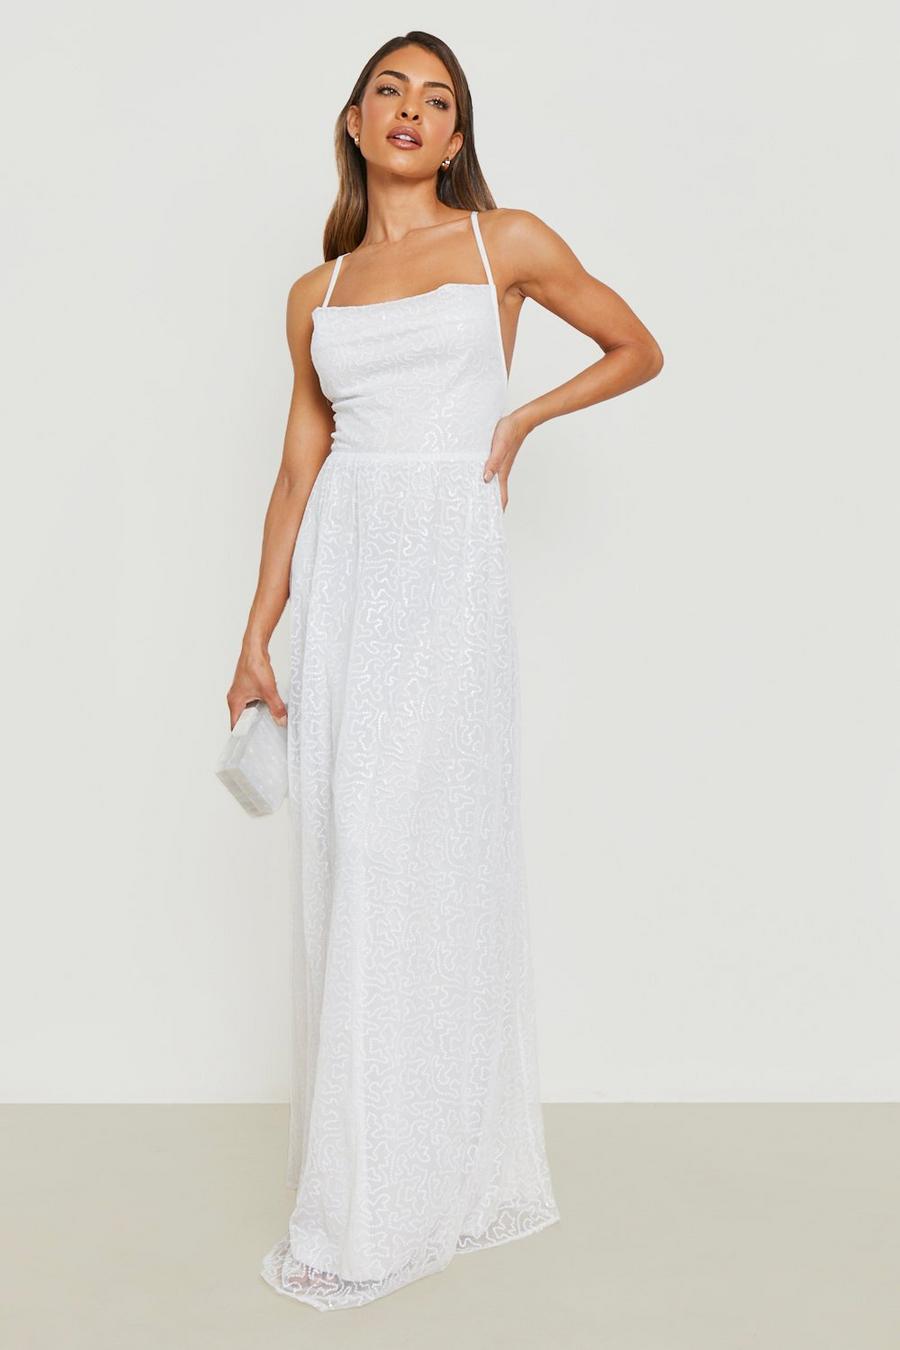 Ivory Sequin Cowl Strappy Maxi Dress